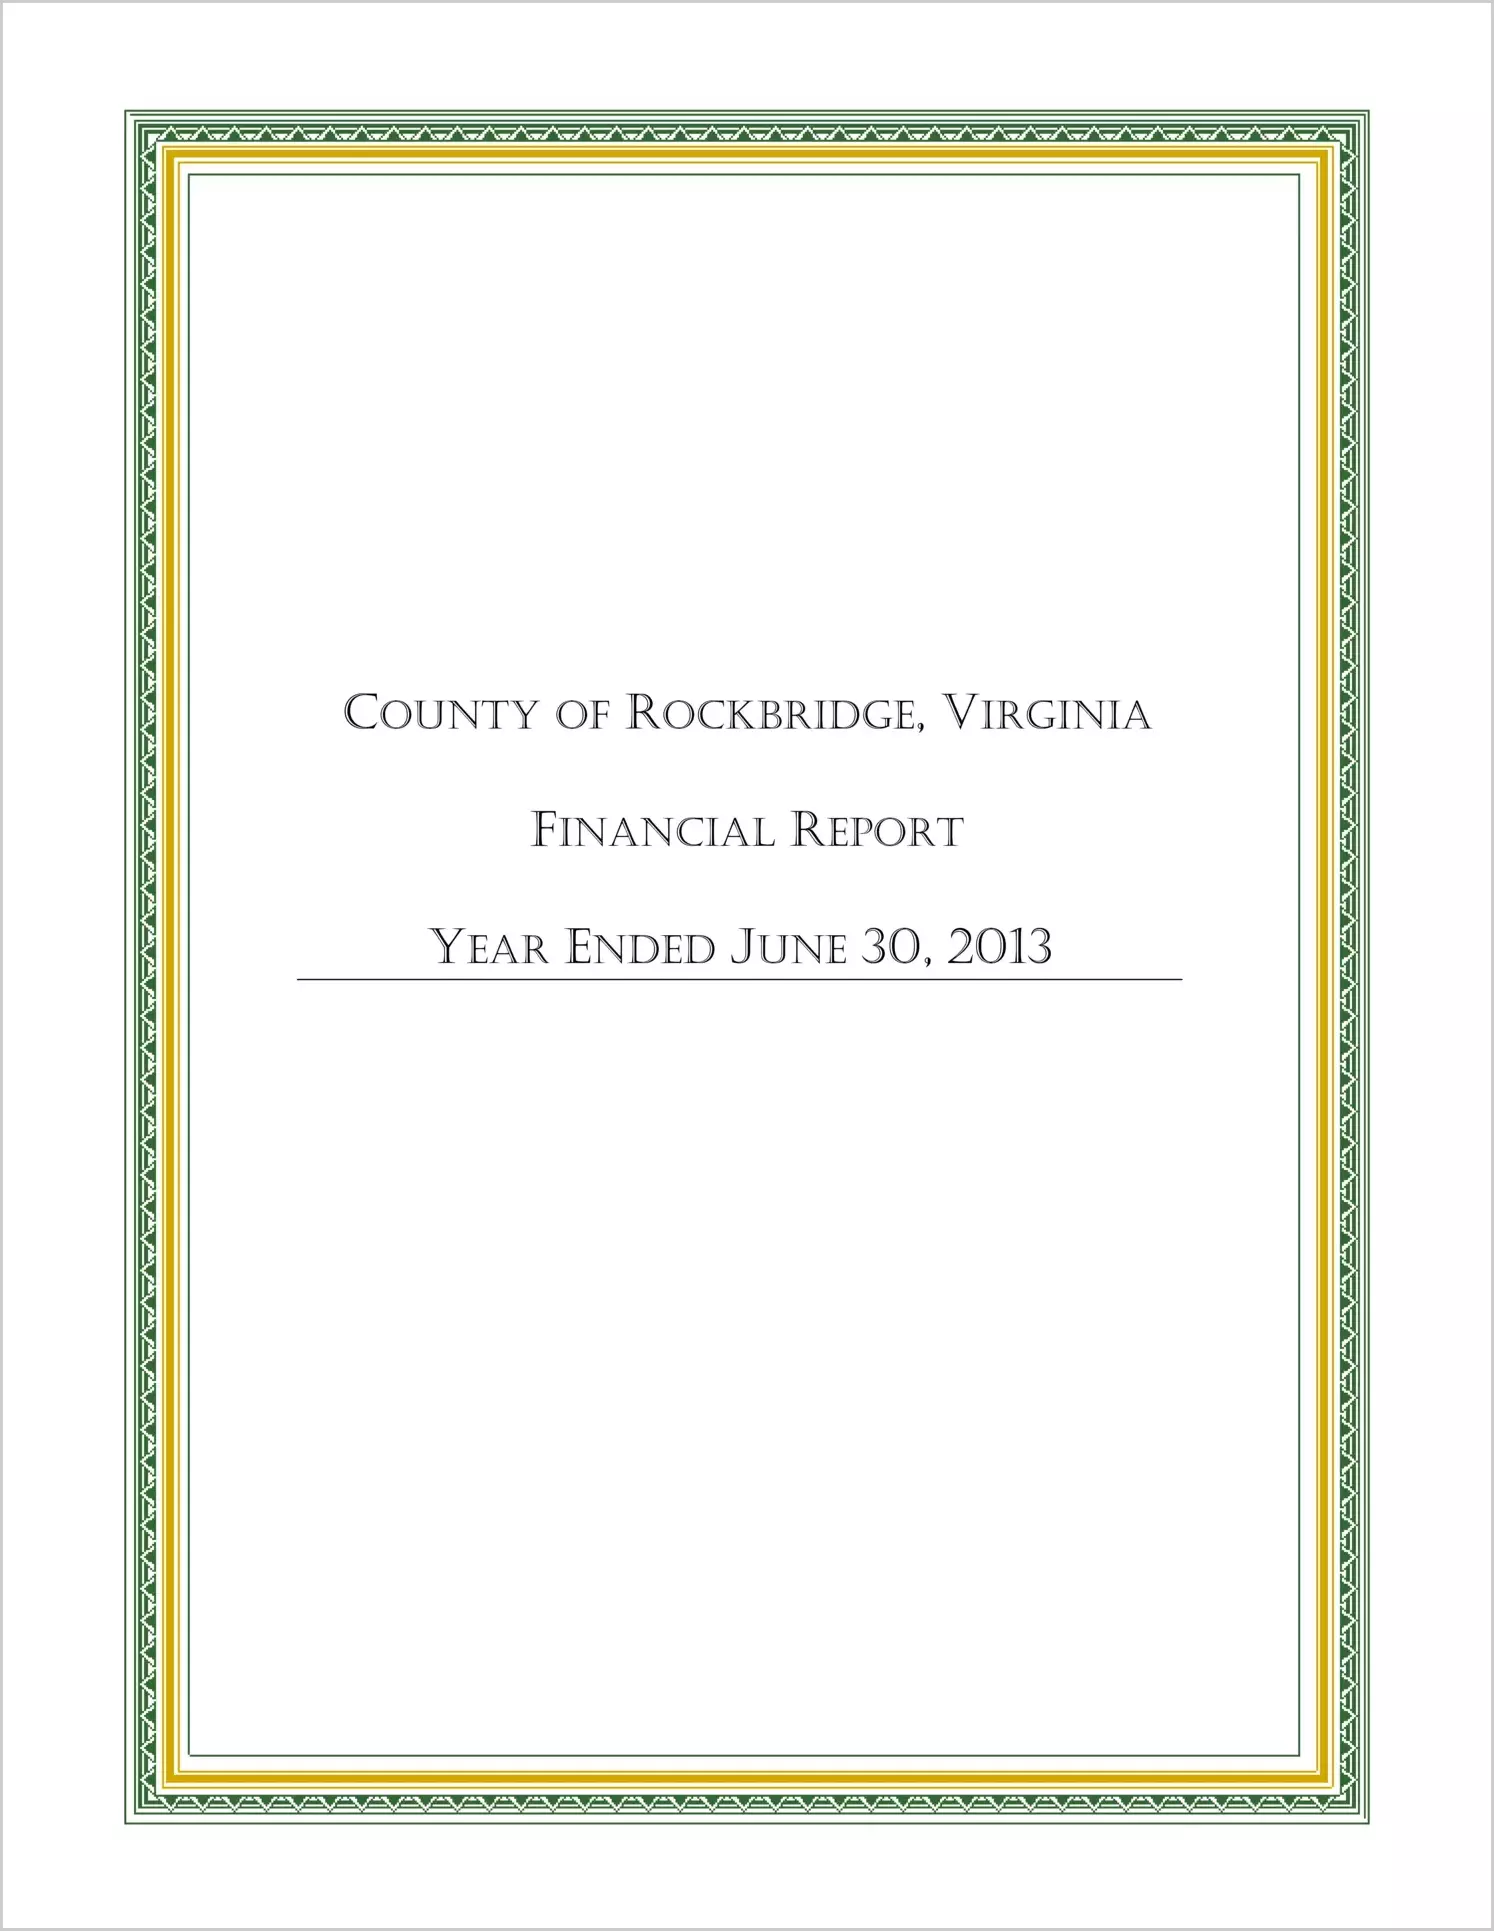 2013 Annual Financial Report for County of Rockbridge